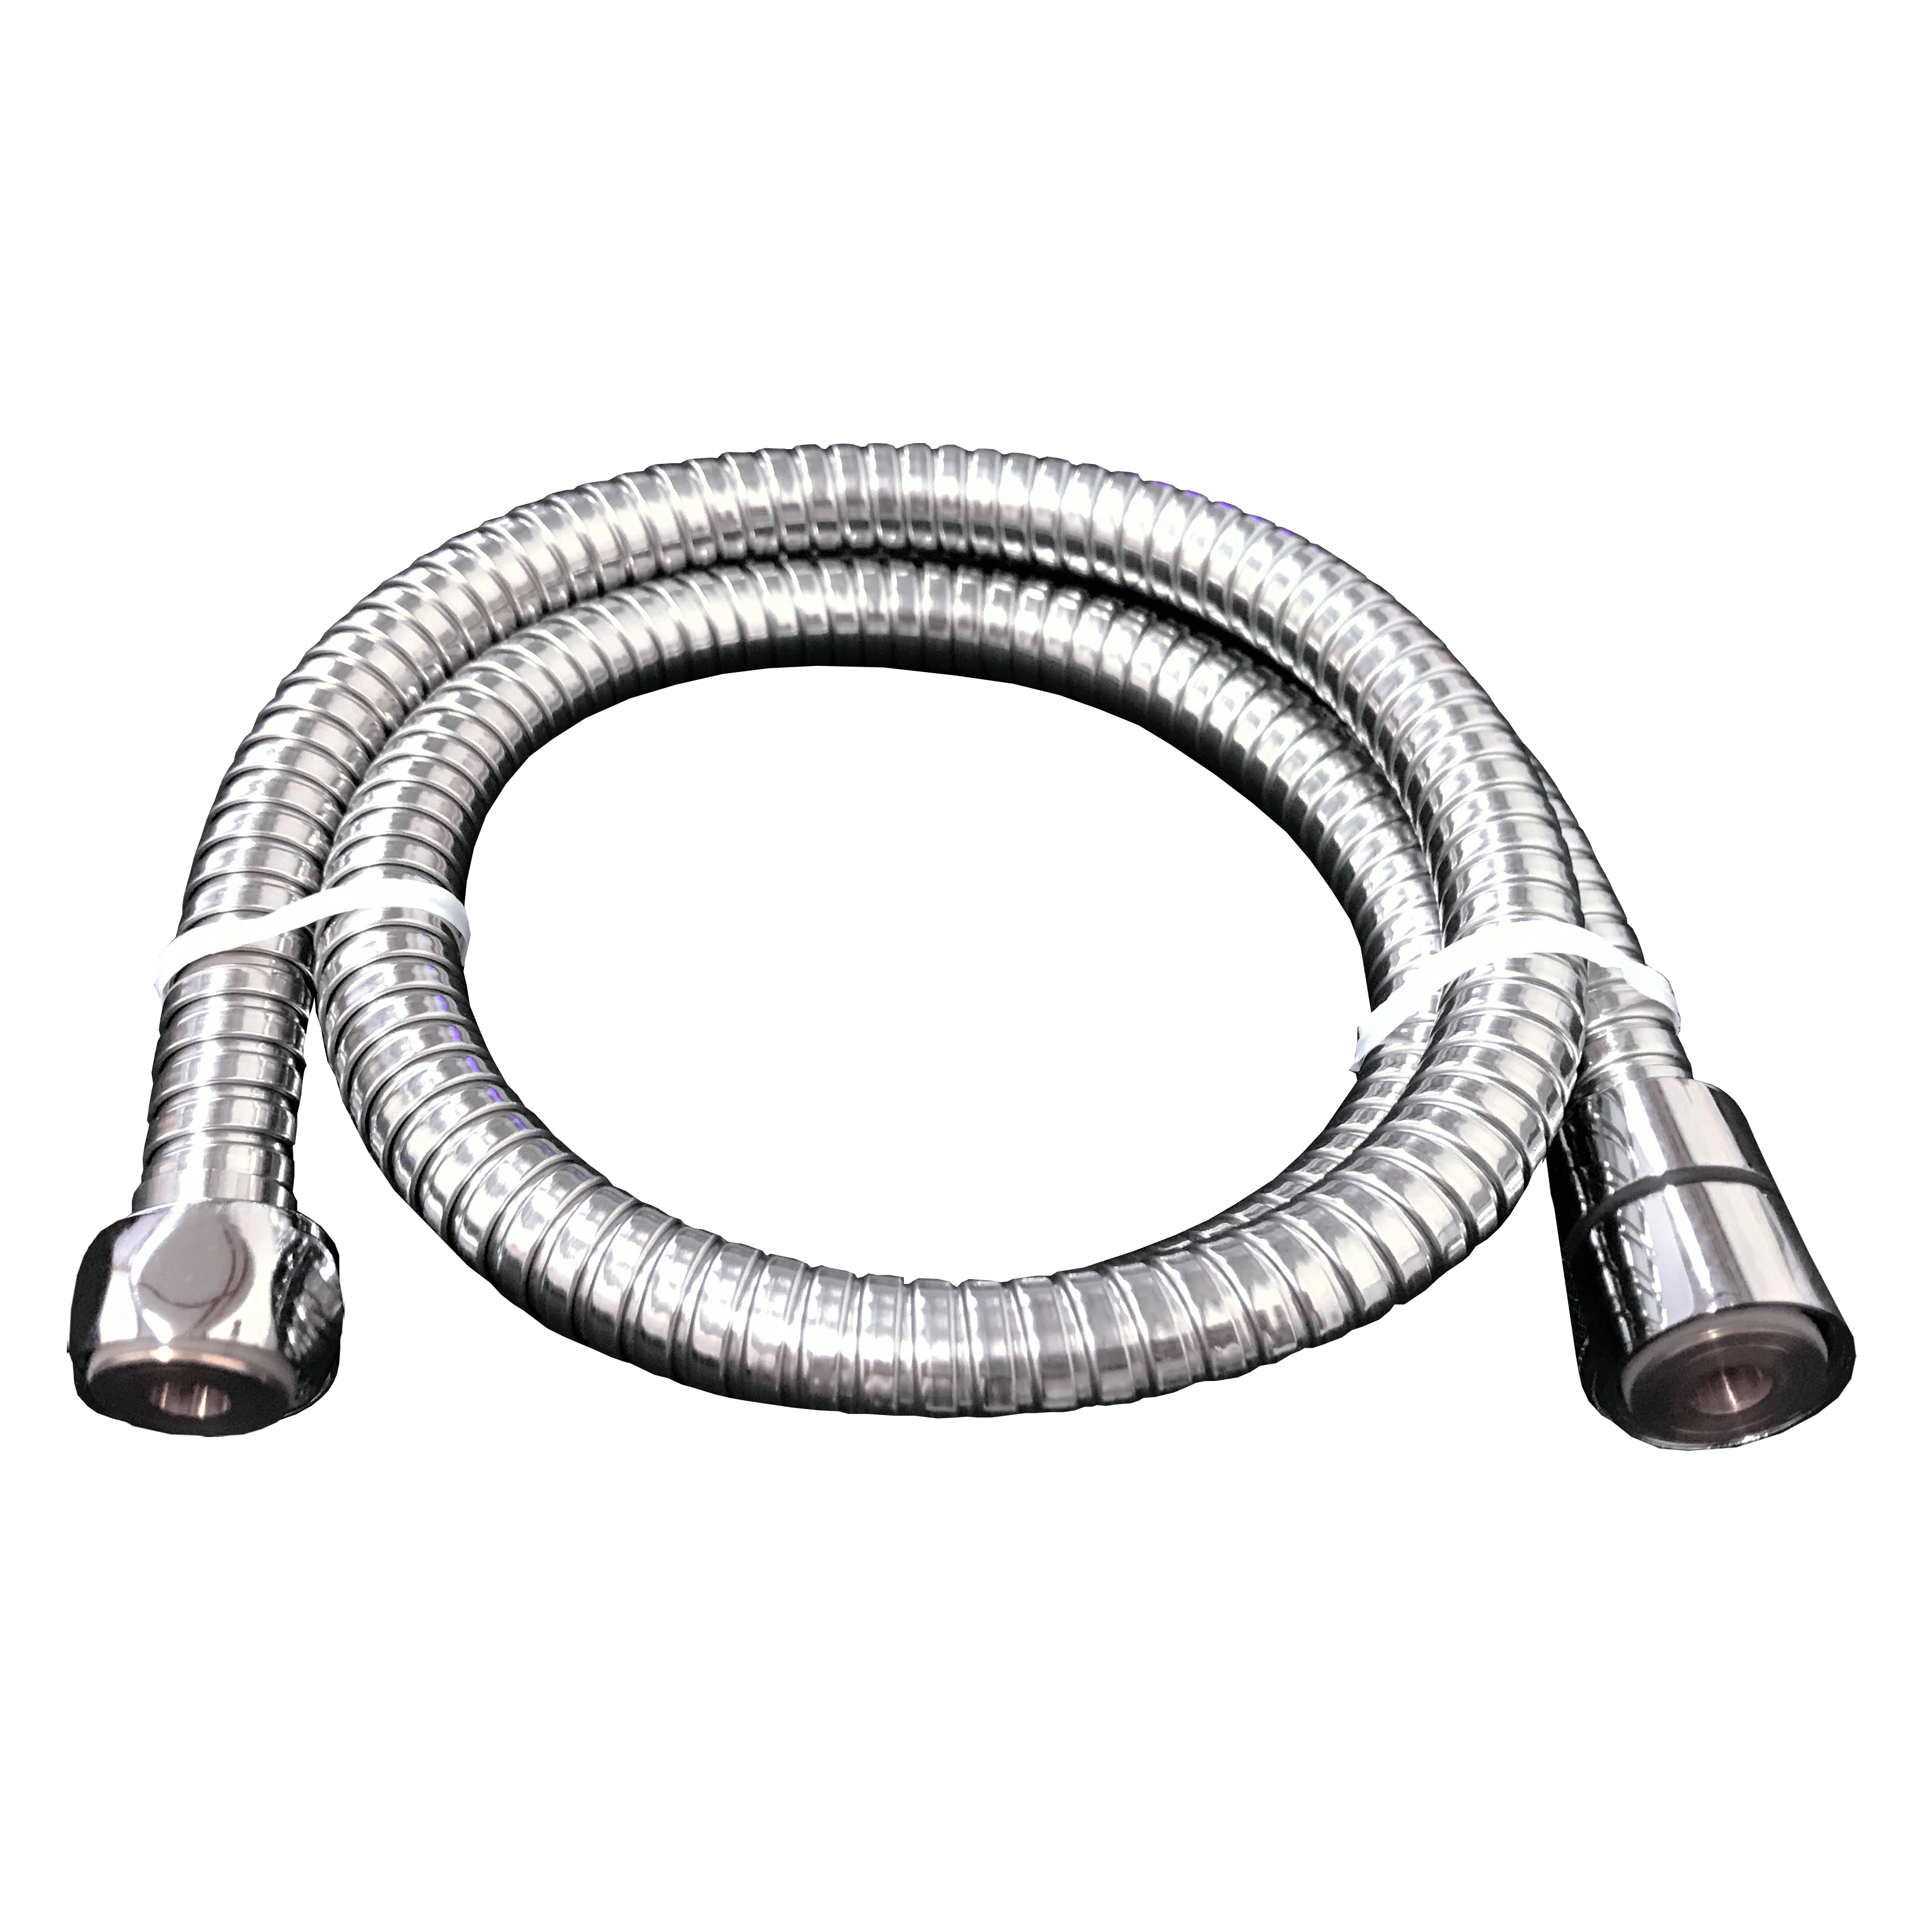 HUSKY 126-1.8m (6' Stainless Steel Double Lock Conical Flexible Hose)